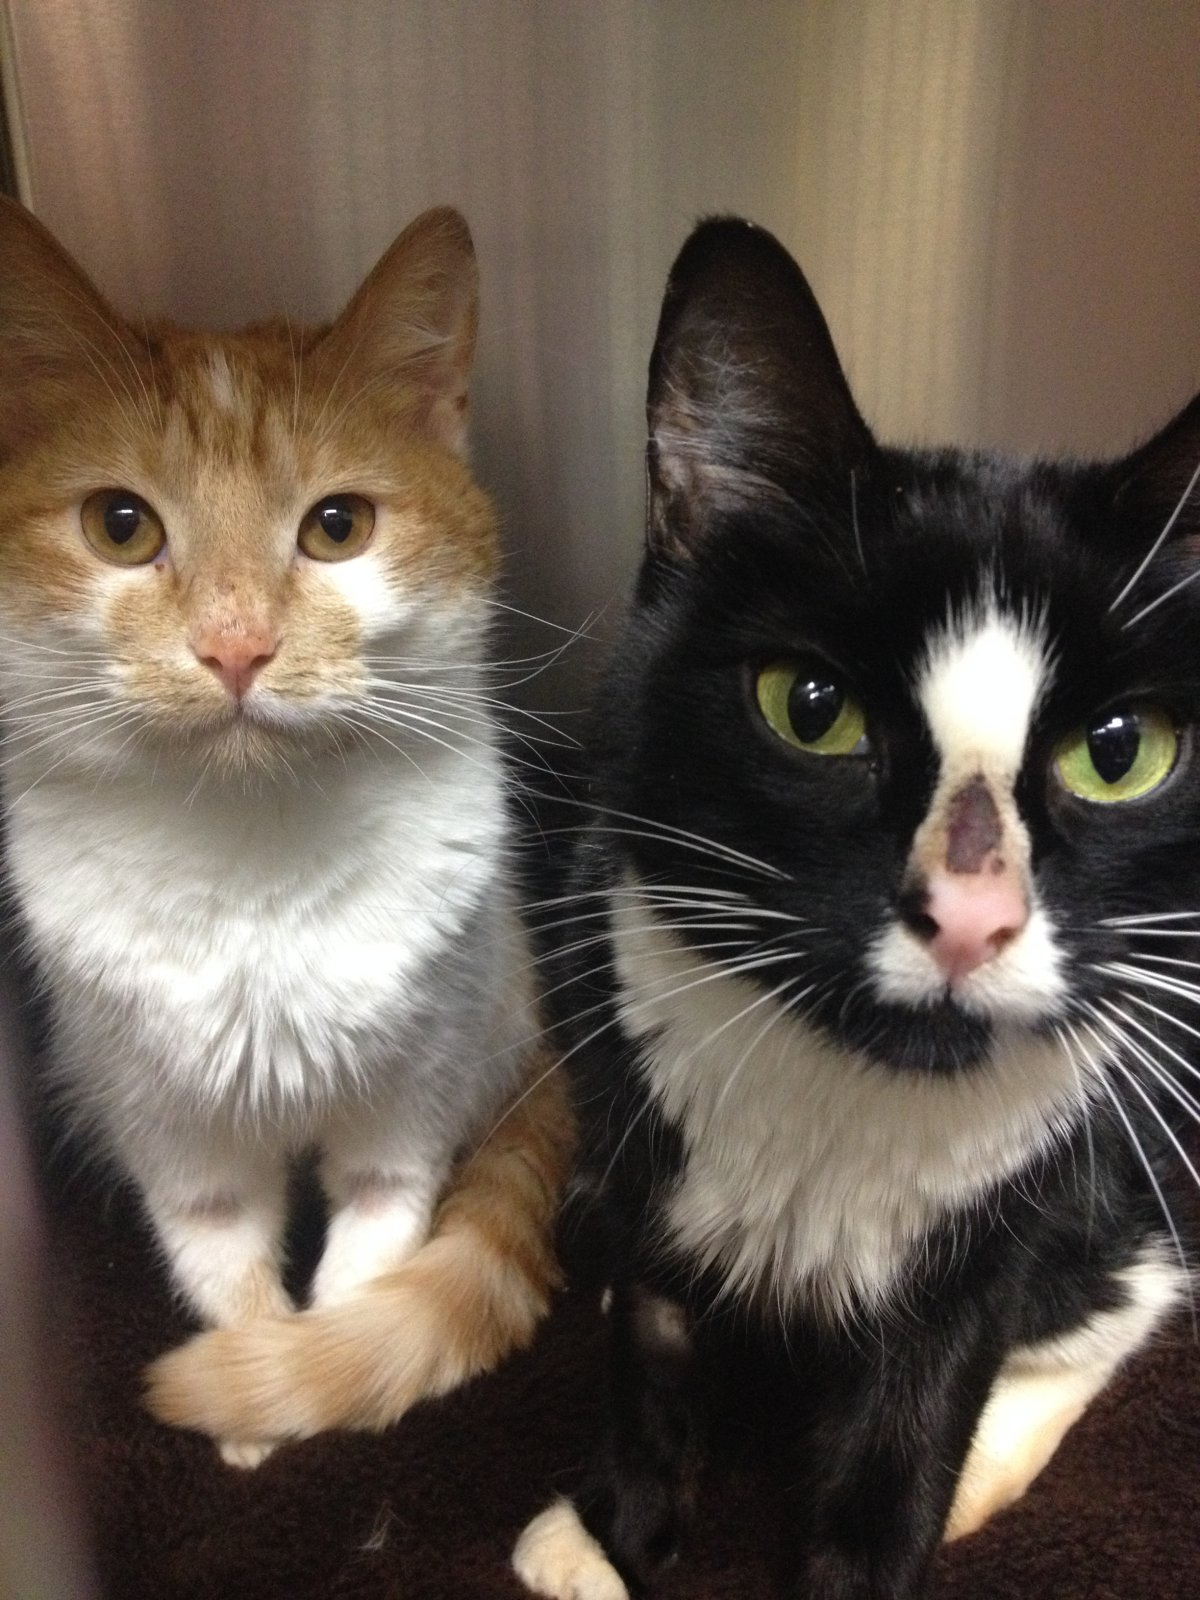 'Katie' and 'Jessie' are lucky to be alive after they were dumped on the side of the road in a sealed packing crate.